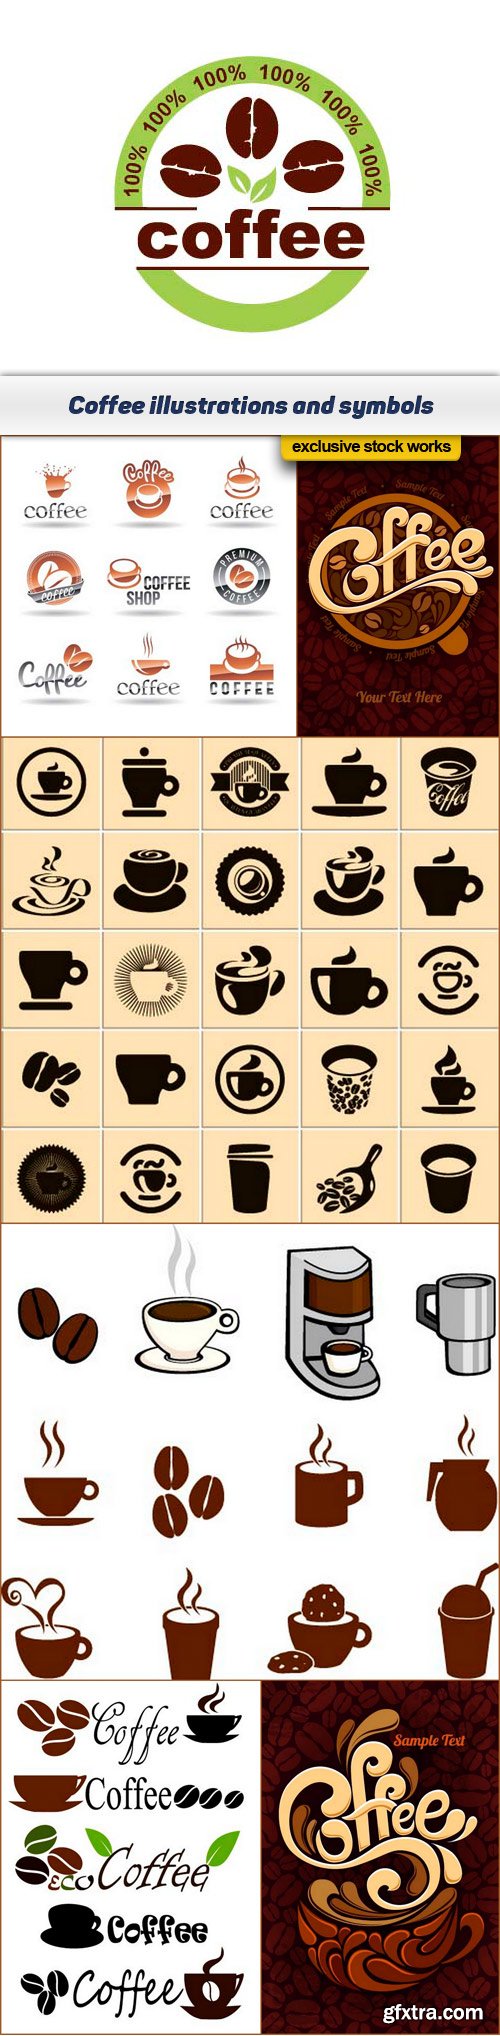 Coffee and hot drinks illustrations and symbols 7x EPS